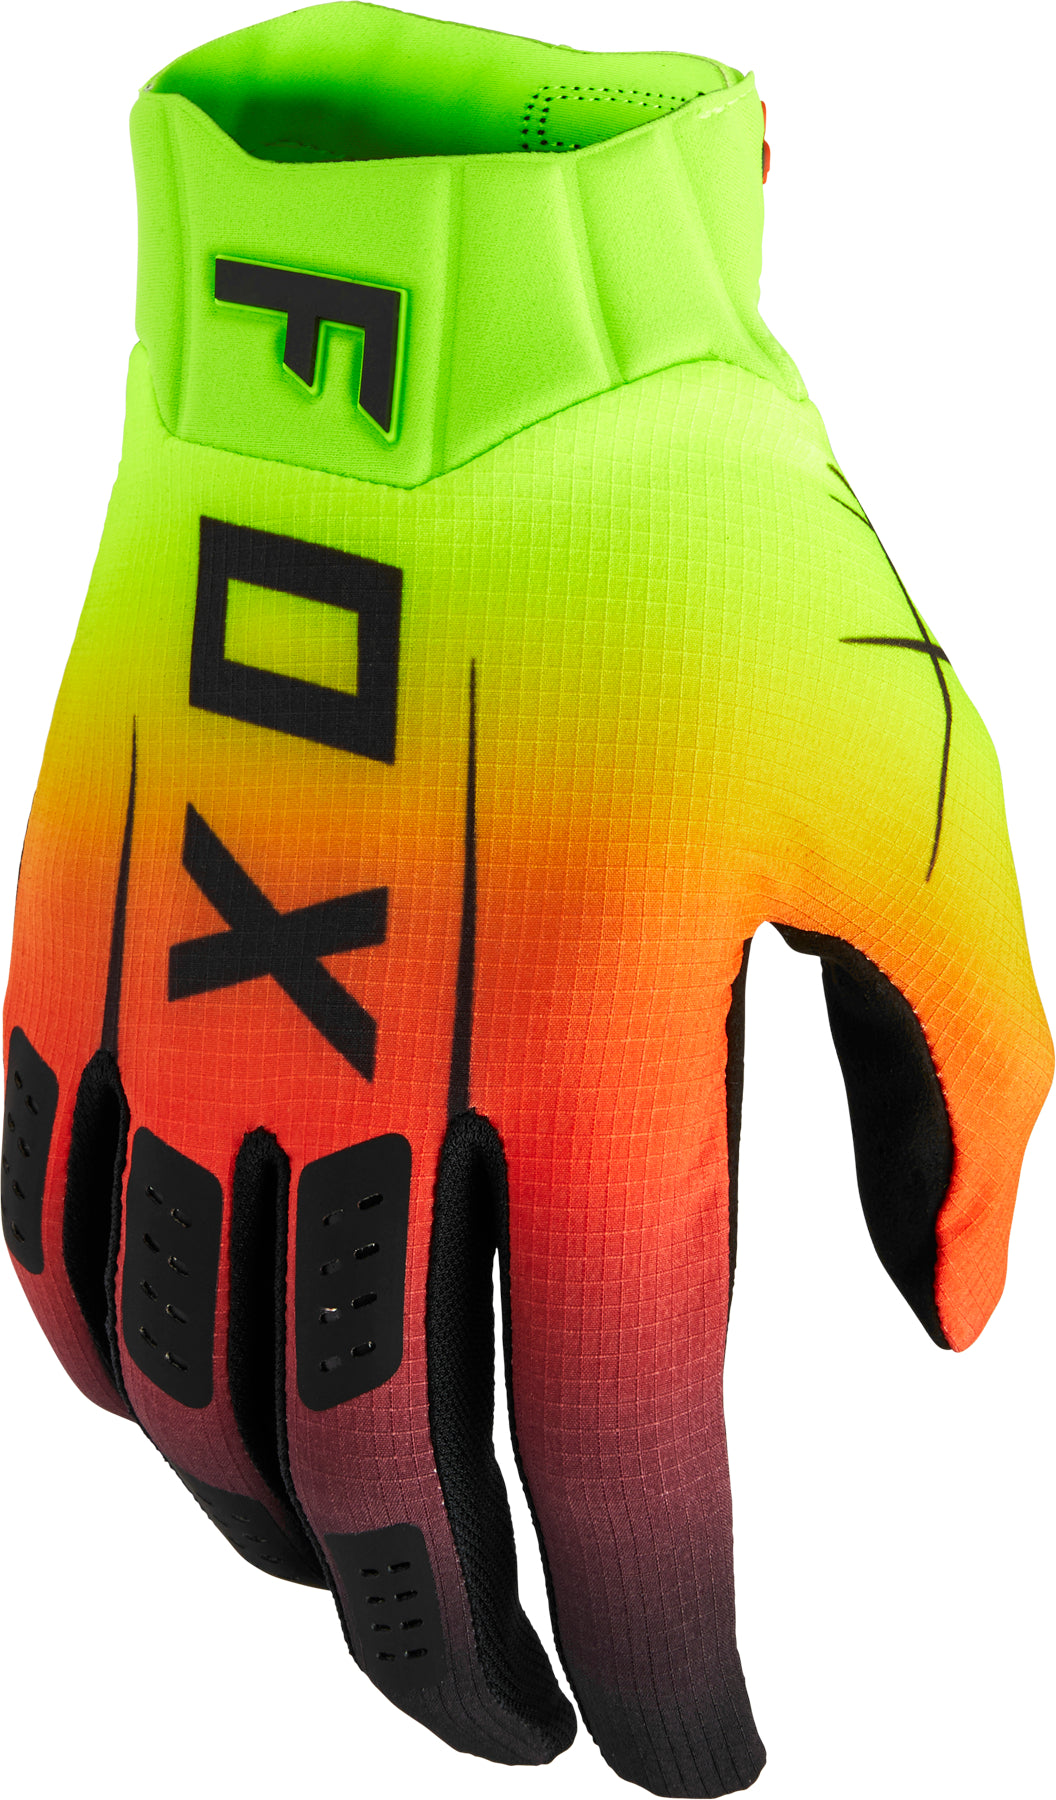 FOX RACING FLEXAIR CELZ LIMITED ED. GLOVES - FLO RED - ADULT SMALL